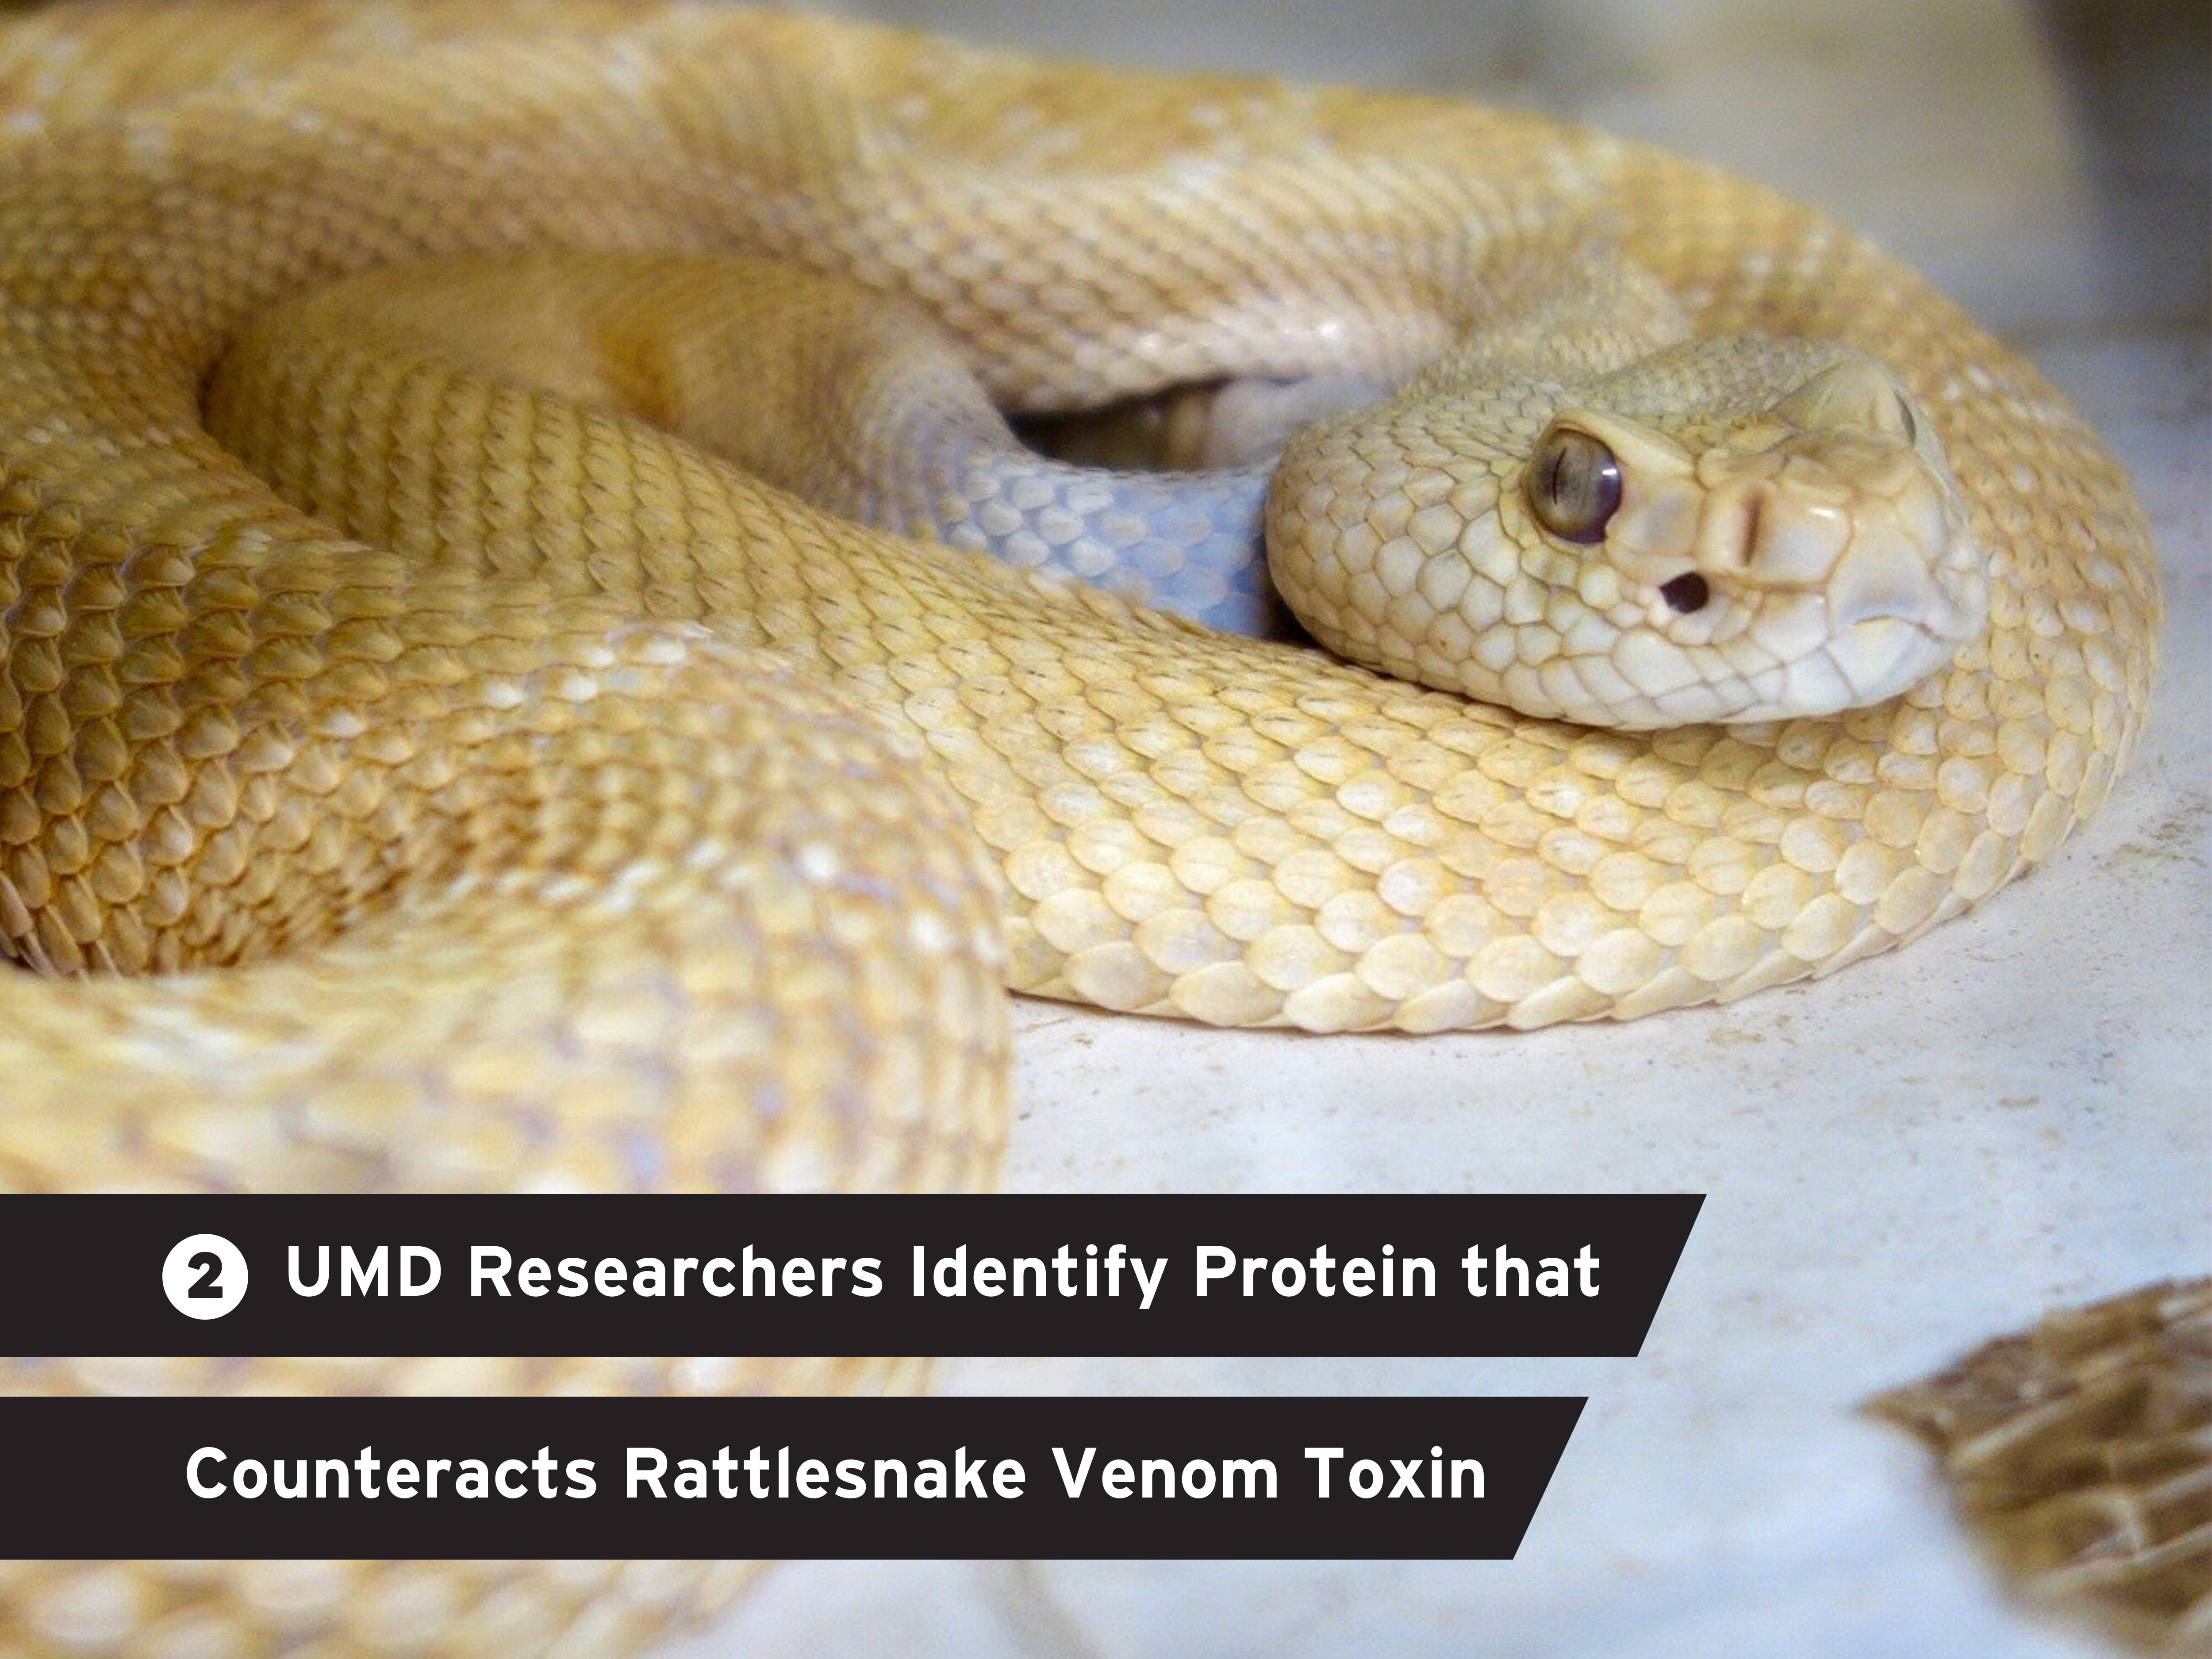 "UMD Researchers Identify Protein that Counteracts Key Rattlesnake Venom Toxins" over a background of a white rattlesnake